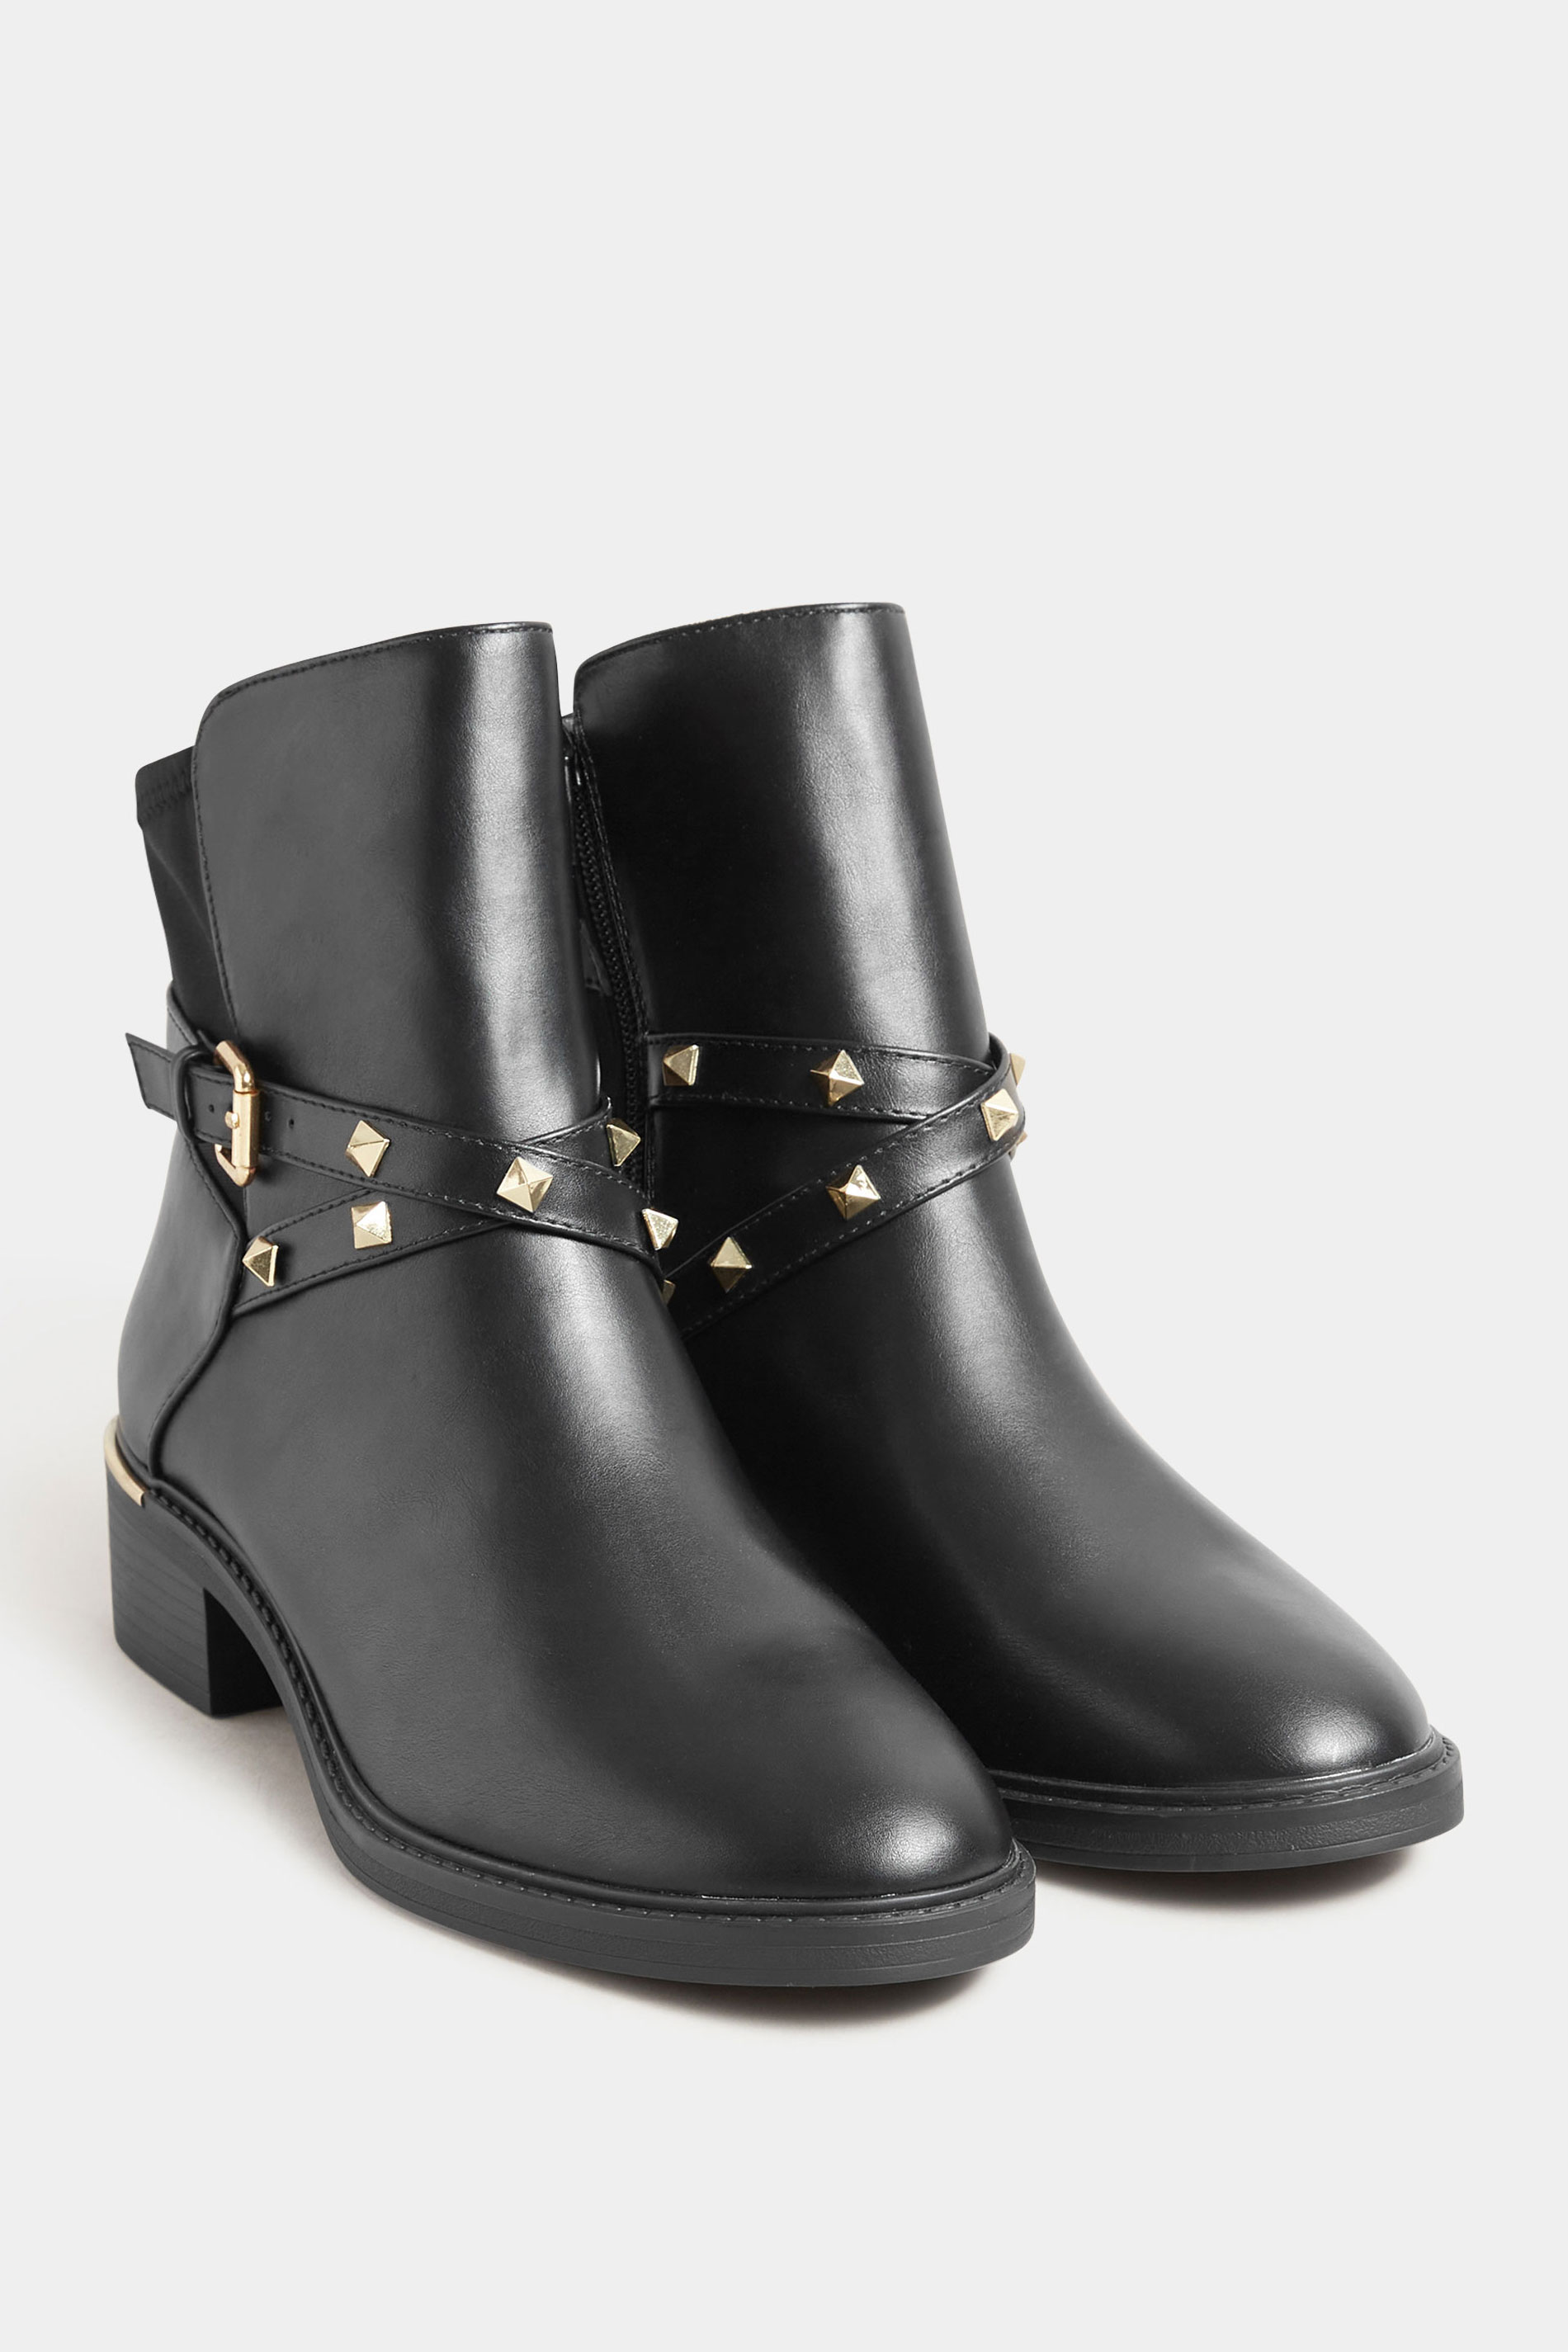 LTS Black & Gold Hardware Chelsea Boots In Standard Fit | Long Tall Sally 2